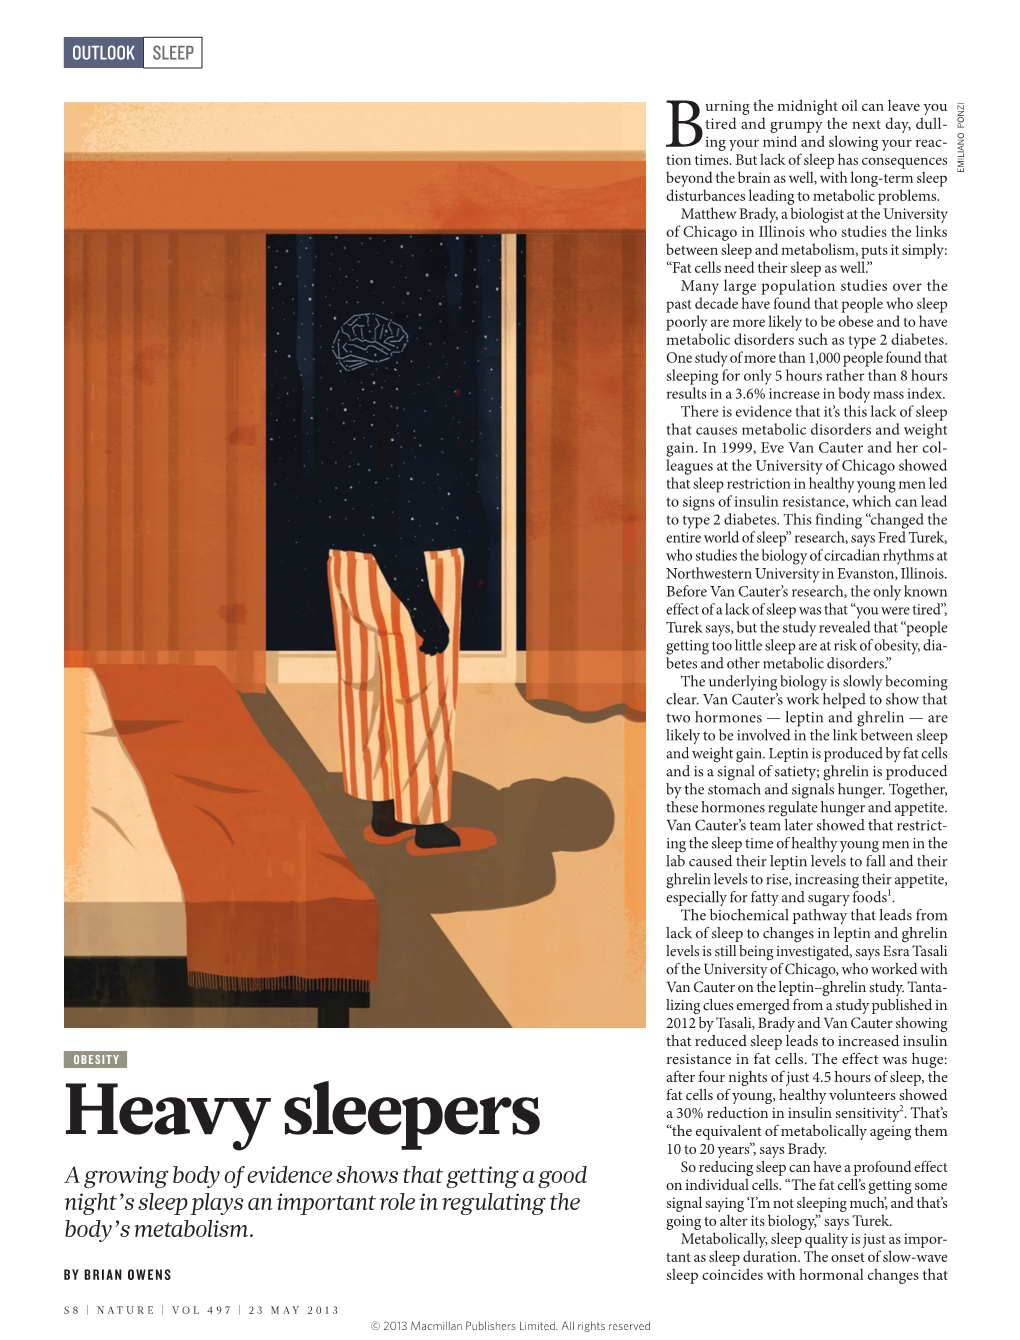 Heavy Sleepers “The Equivalent of Metabolically Ageing Them 10 to 20 Years”, Says Brady